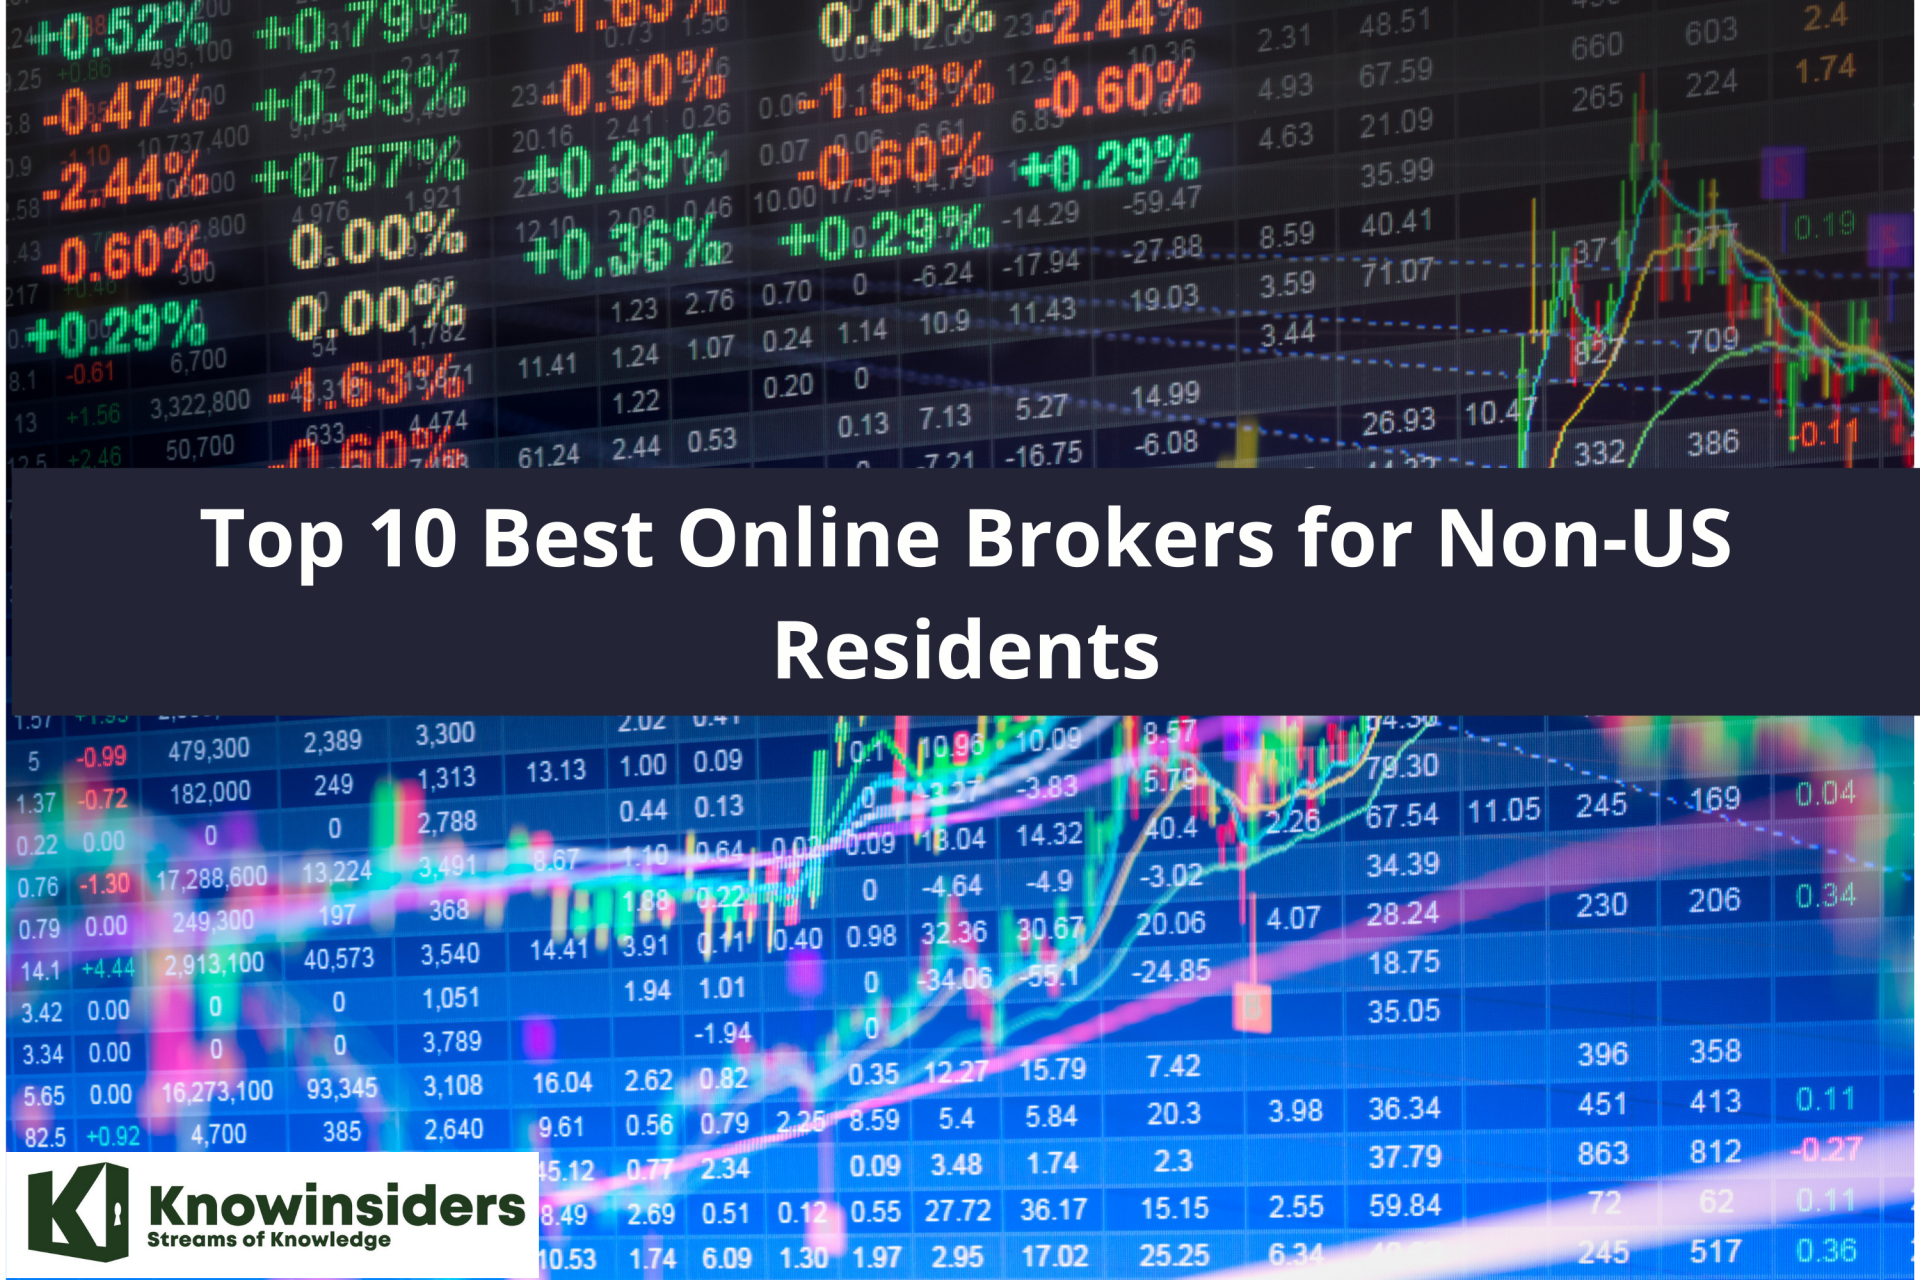 Top 10 Best Online Stock Brokers for Non-US Residents